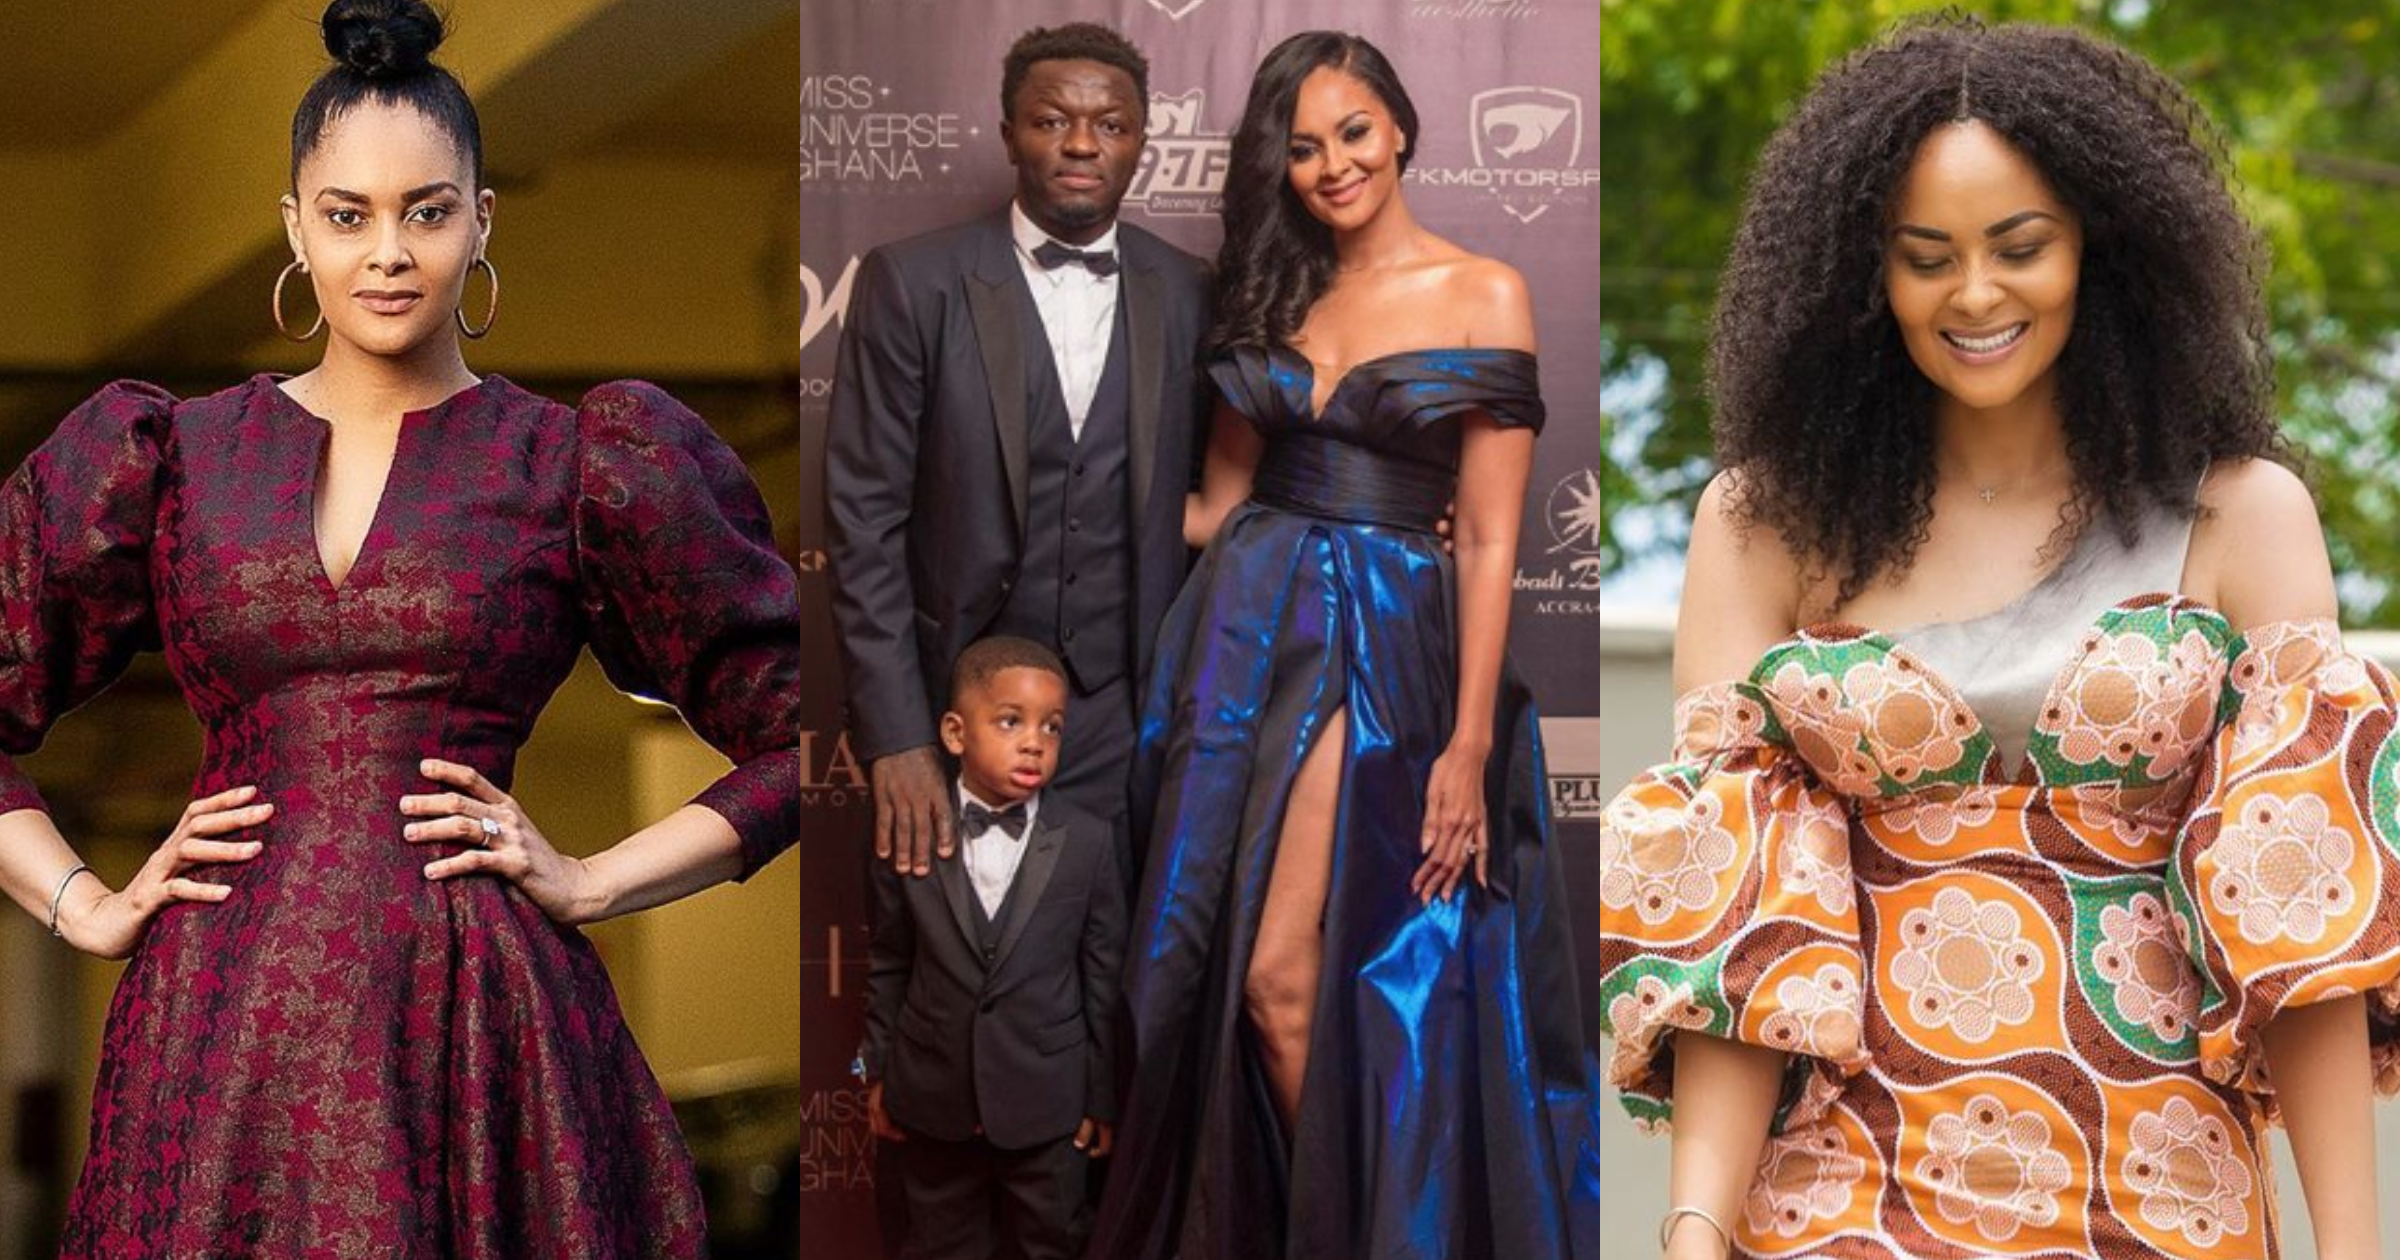 Sulley Muntari's beauty queen wife Menaye Donkor gives birth to their 2nd child; video drops